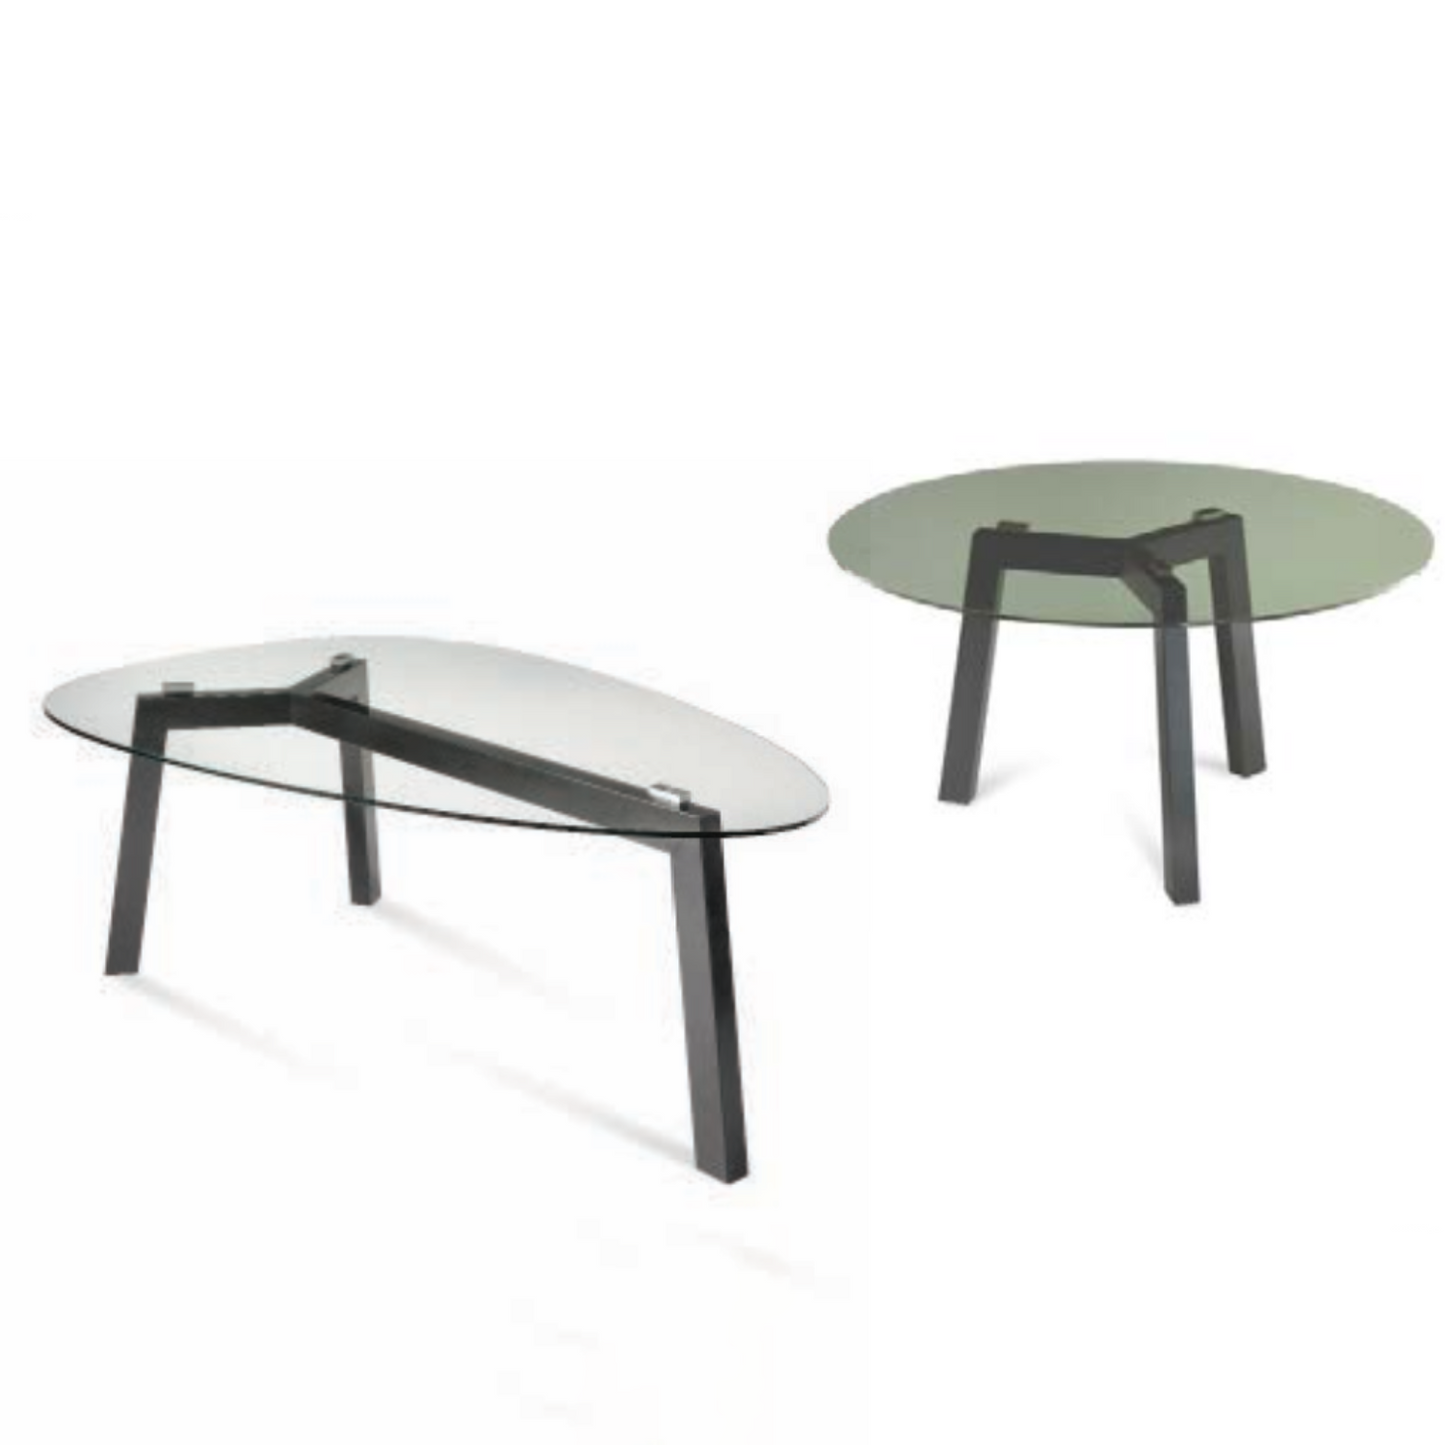 Treble Table by Riflessi Lab